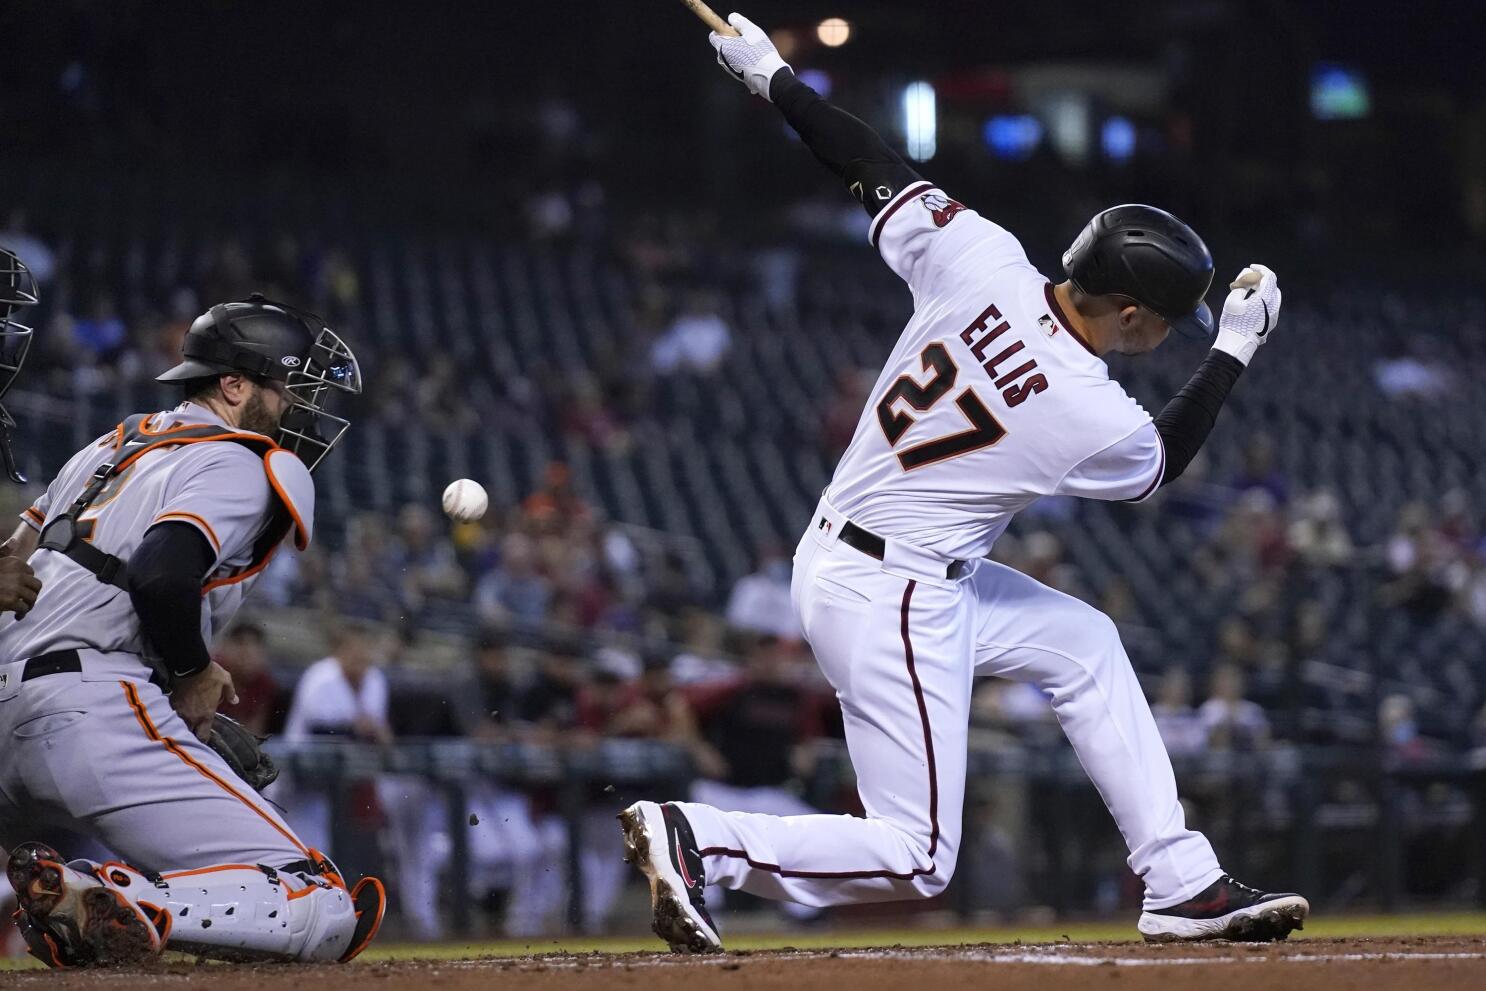 Giants blow two leads, walk off in ninth against Diamondbacks - The Athletic